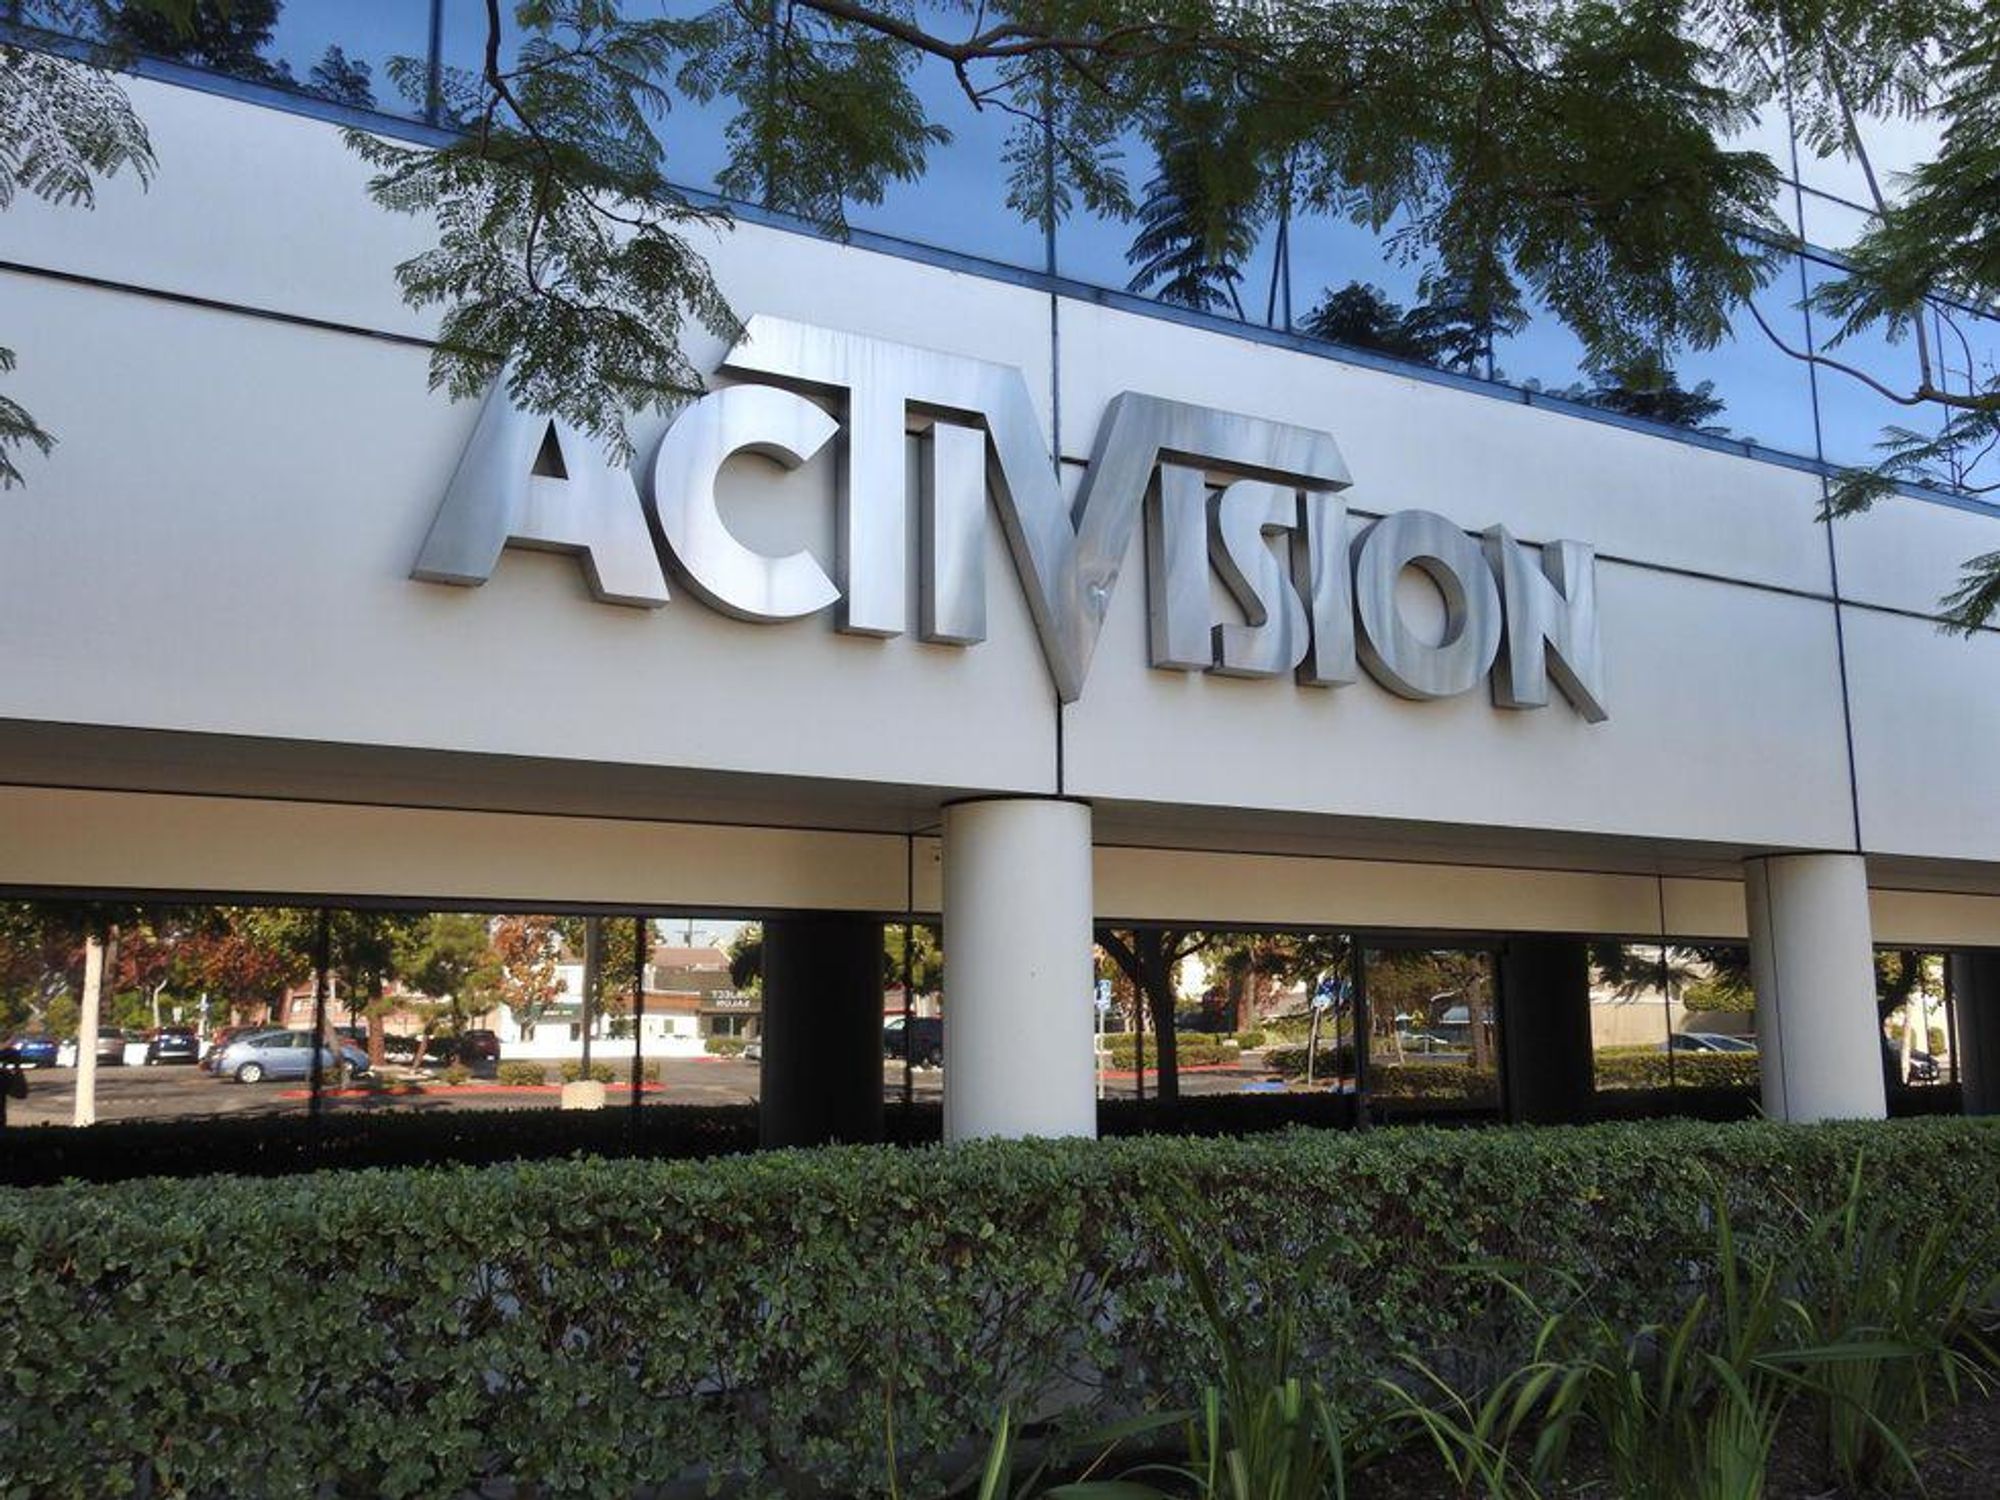 Activision Shareholders, Over 500 Employees Call for CEO Bobby Kotick's Resignation